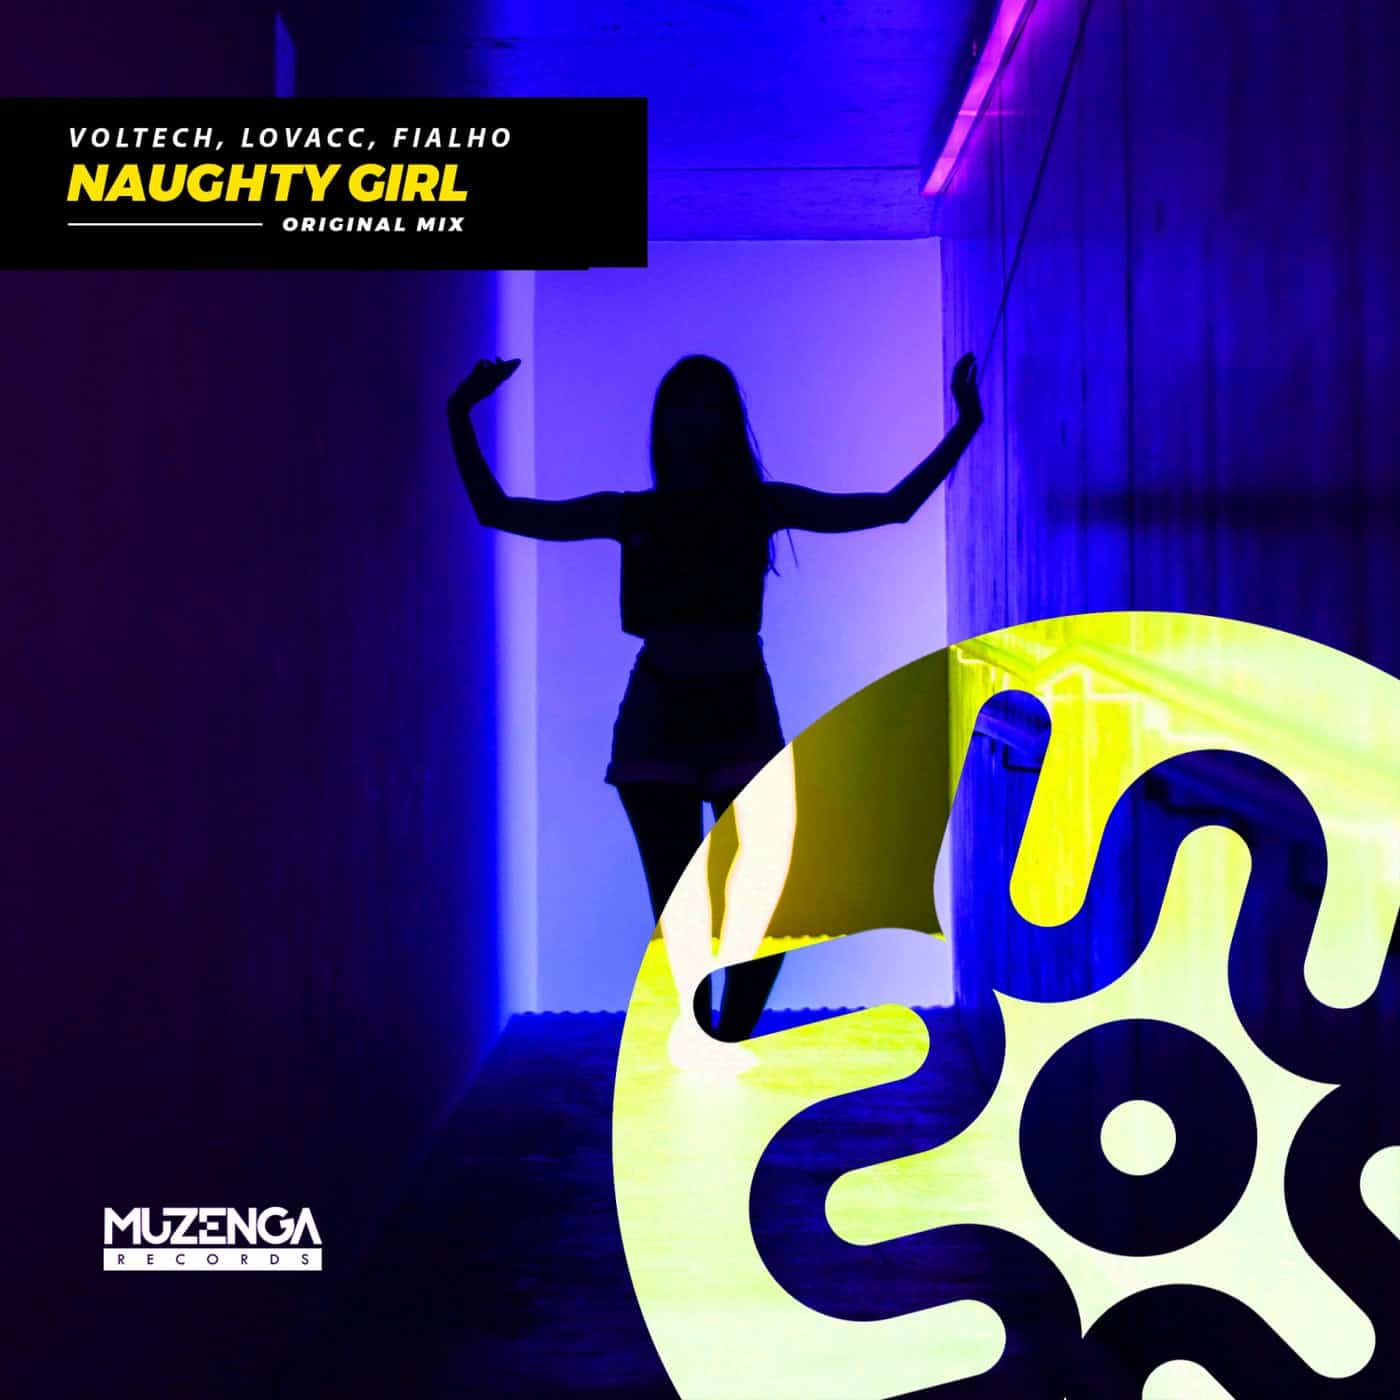 Download Voltech, Lovacc, Fialho BR - Naughty Girl on Electrobuzz